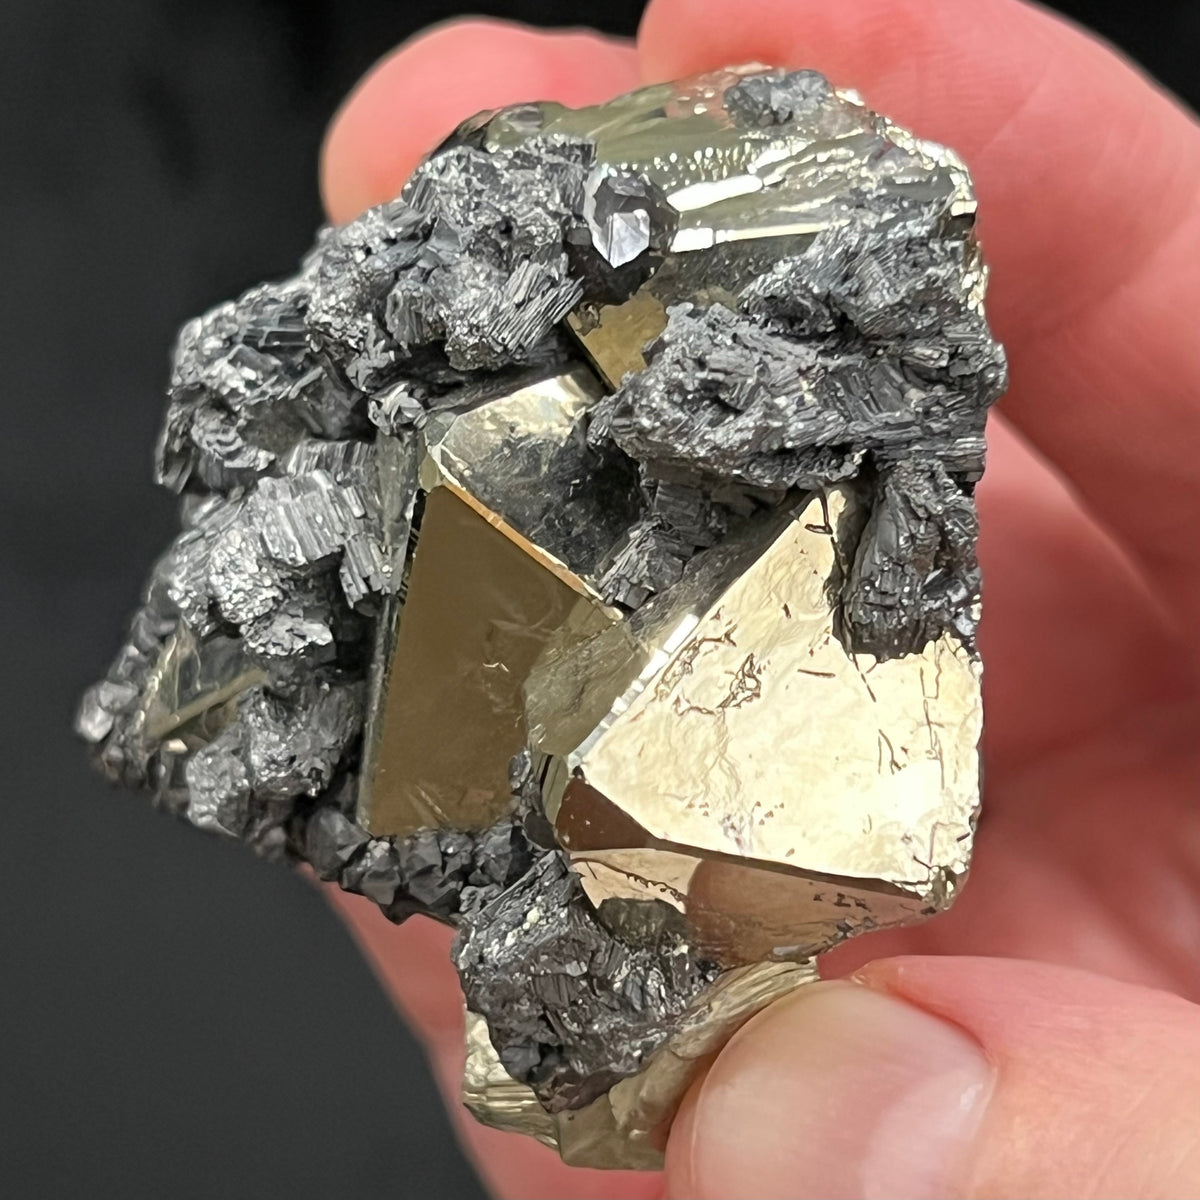 Octahedral Pyrite Larger Mirror Luster Crystals Galena ...